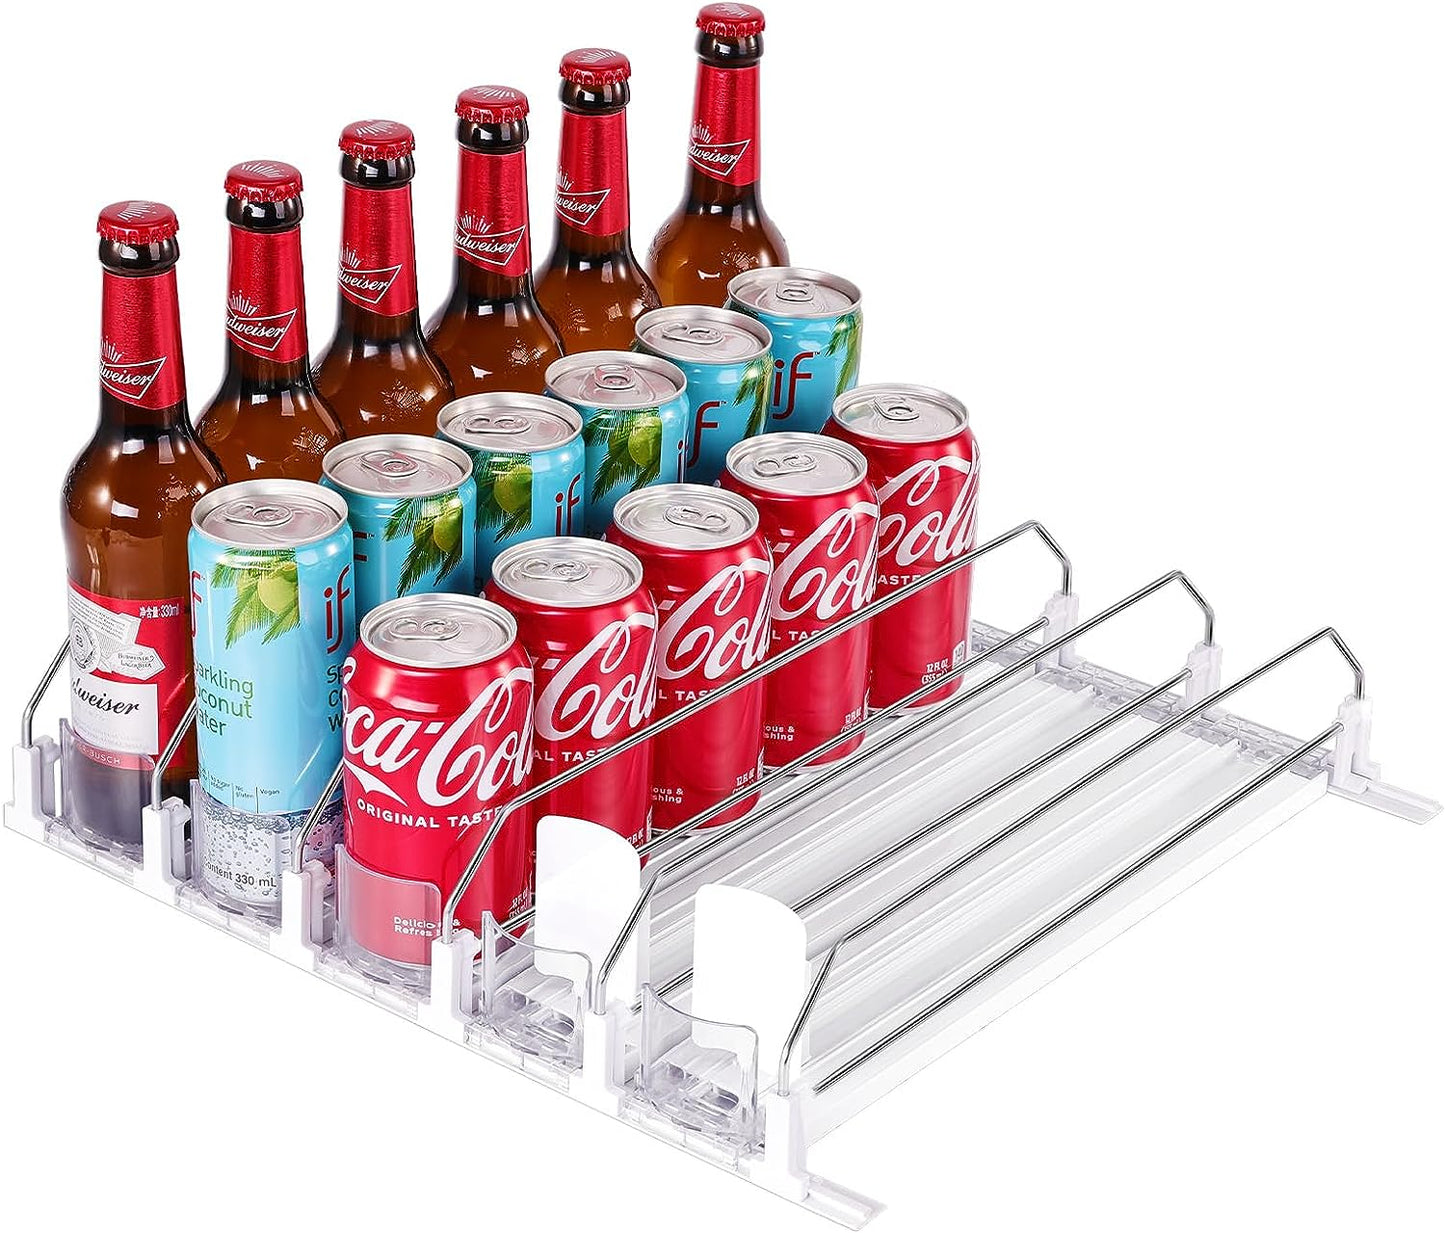 SINGTIP Drink Organizer for Fridge Soda Can Dispenser Water Bottle Can Storage Organization for Refrigerator with Adjustable Pusher Glide - Perfect for Soda, Beer, and Other Beverages (5 Rows, 38CM)